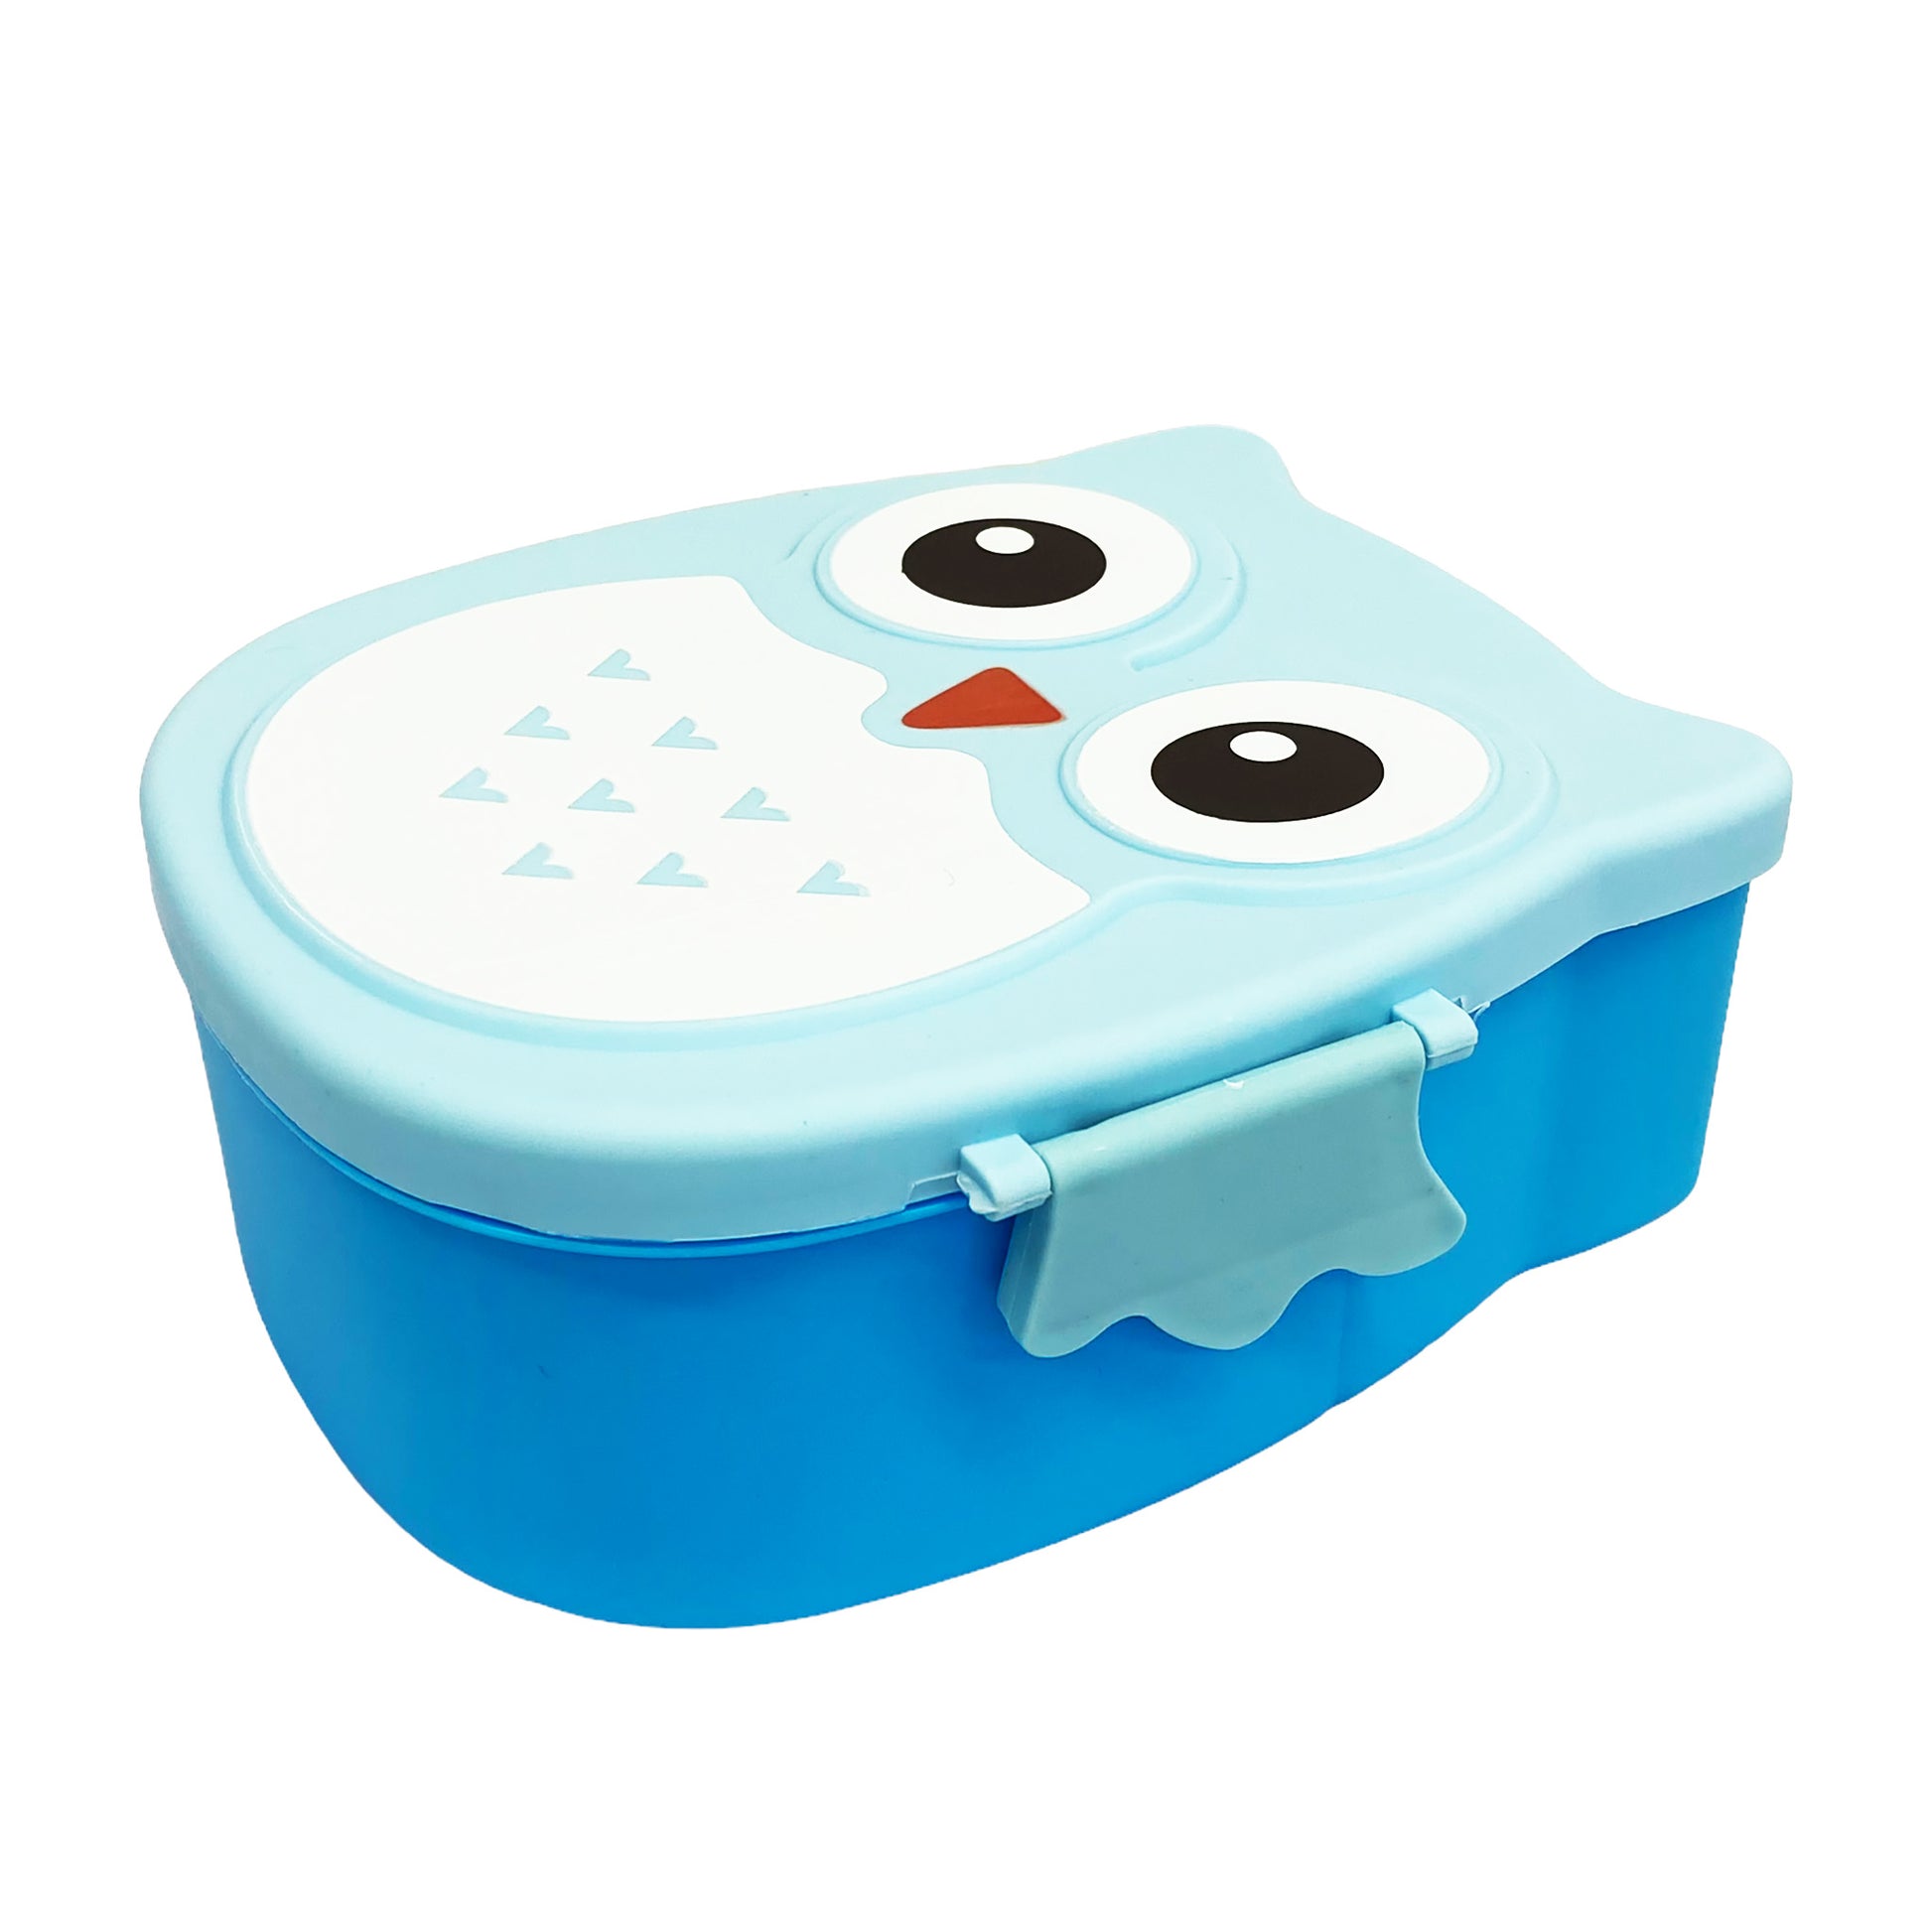 Owl Lunch Box Set - Blue 6 X 5.5 X 2.5 Inches - Just Asian Food